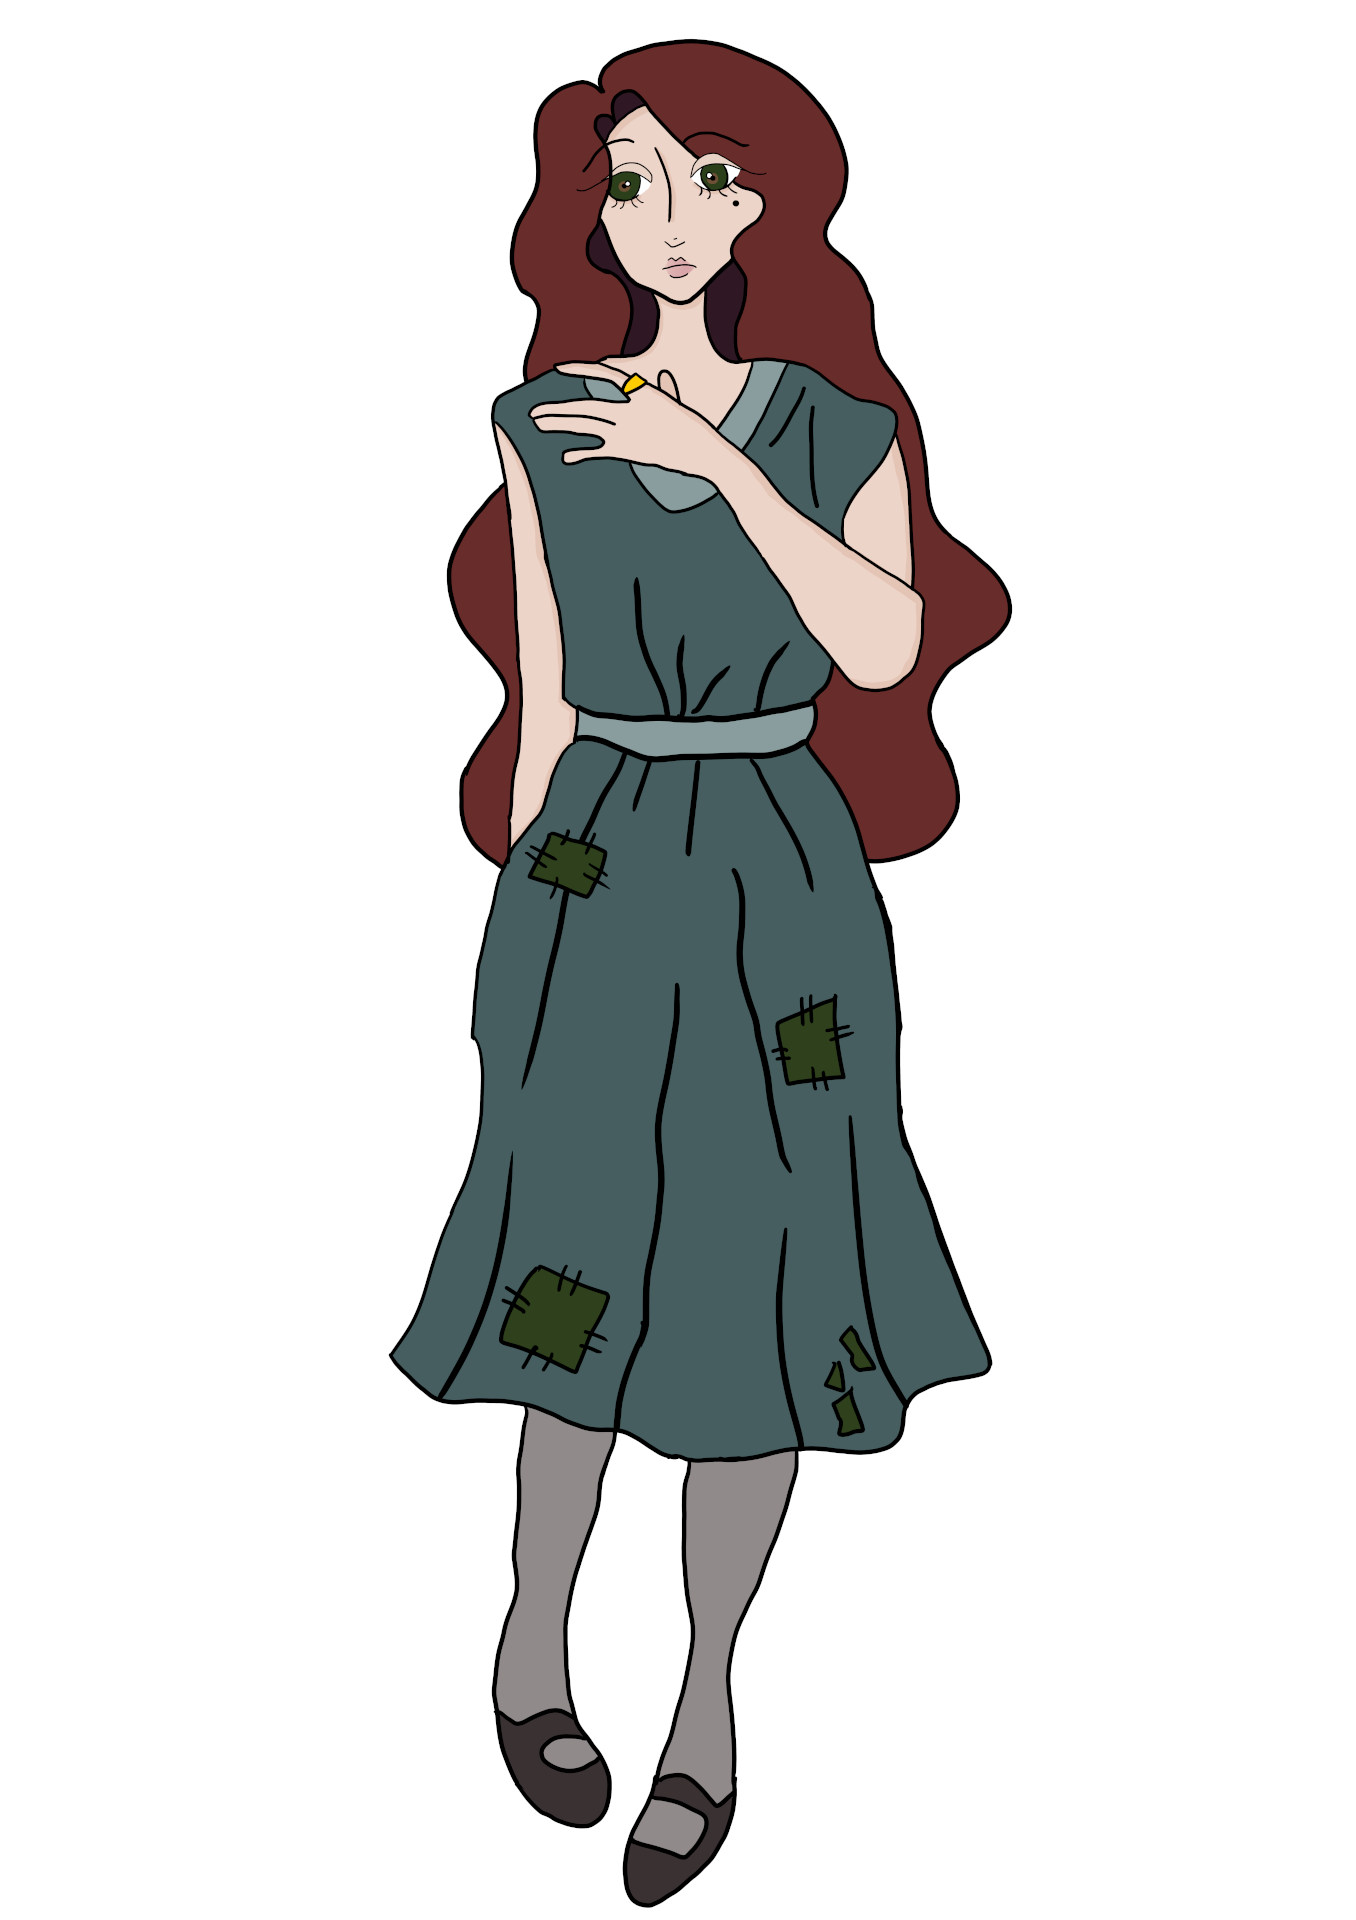 Illustration of woman in green dress with patches